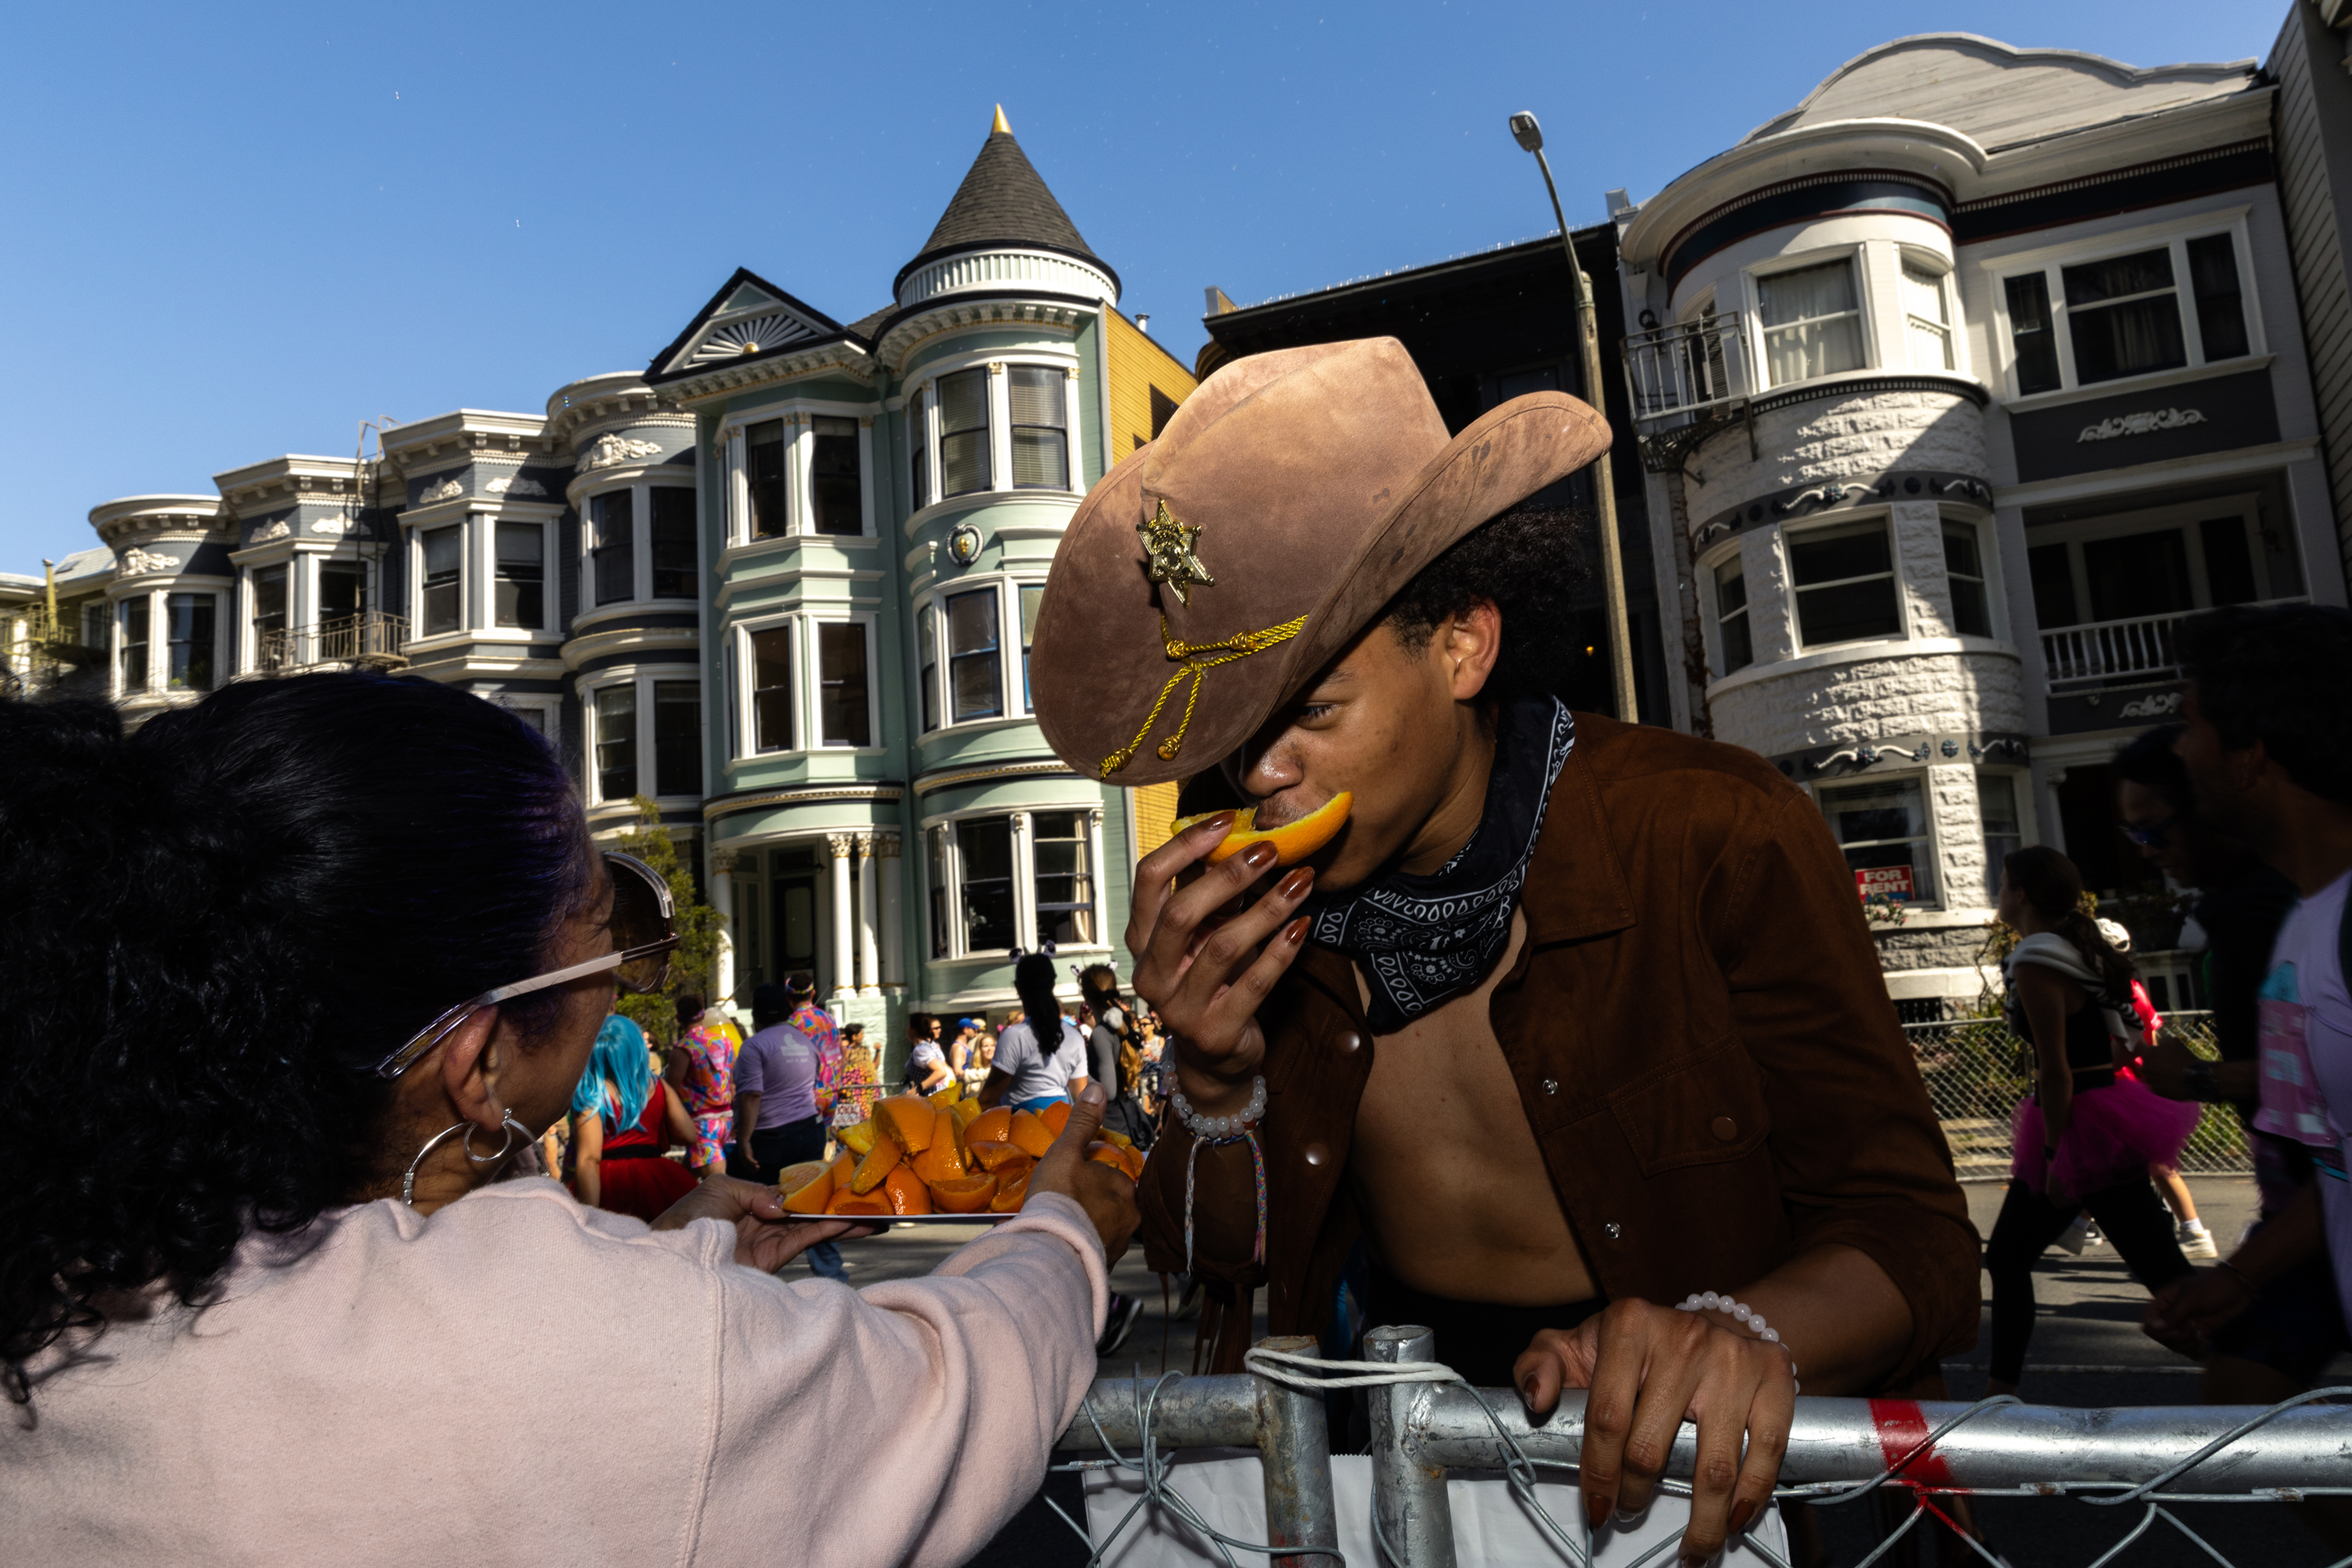 A person in a cowboy hat is eating an orange slice from a tray held by another. They are in front of colorful Victorian-style houses under a clear sky.